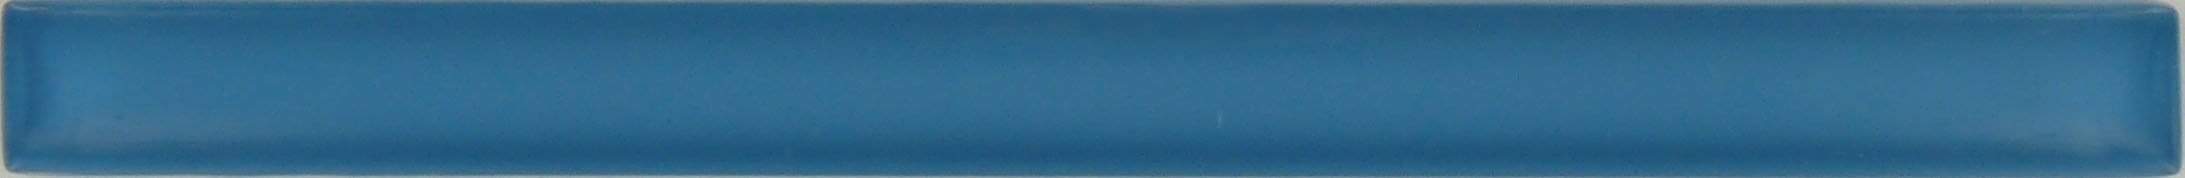 Cyan Blue 1" x 12" Glossy Glass Liner Millenium Products